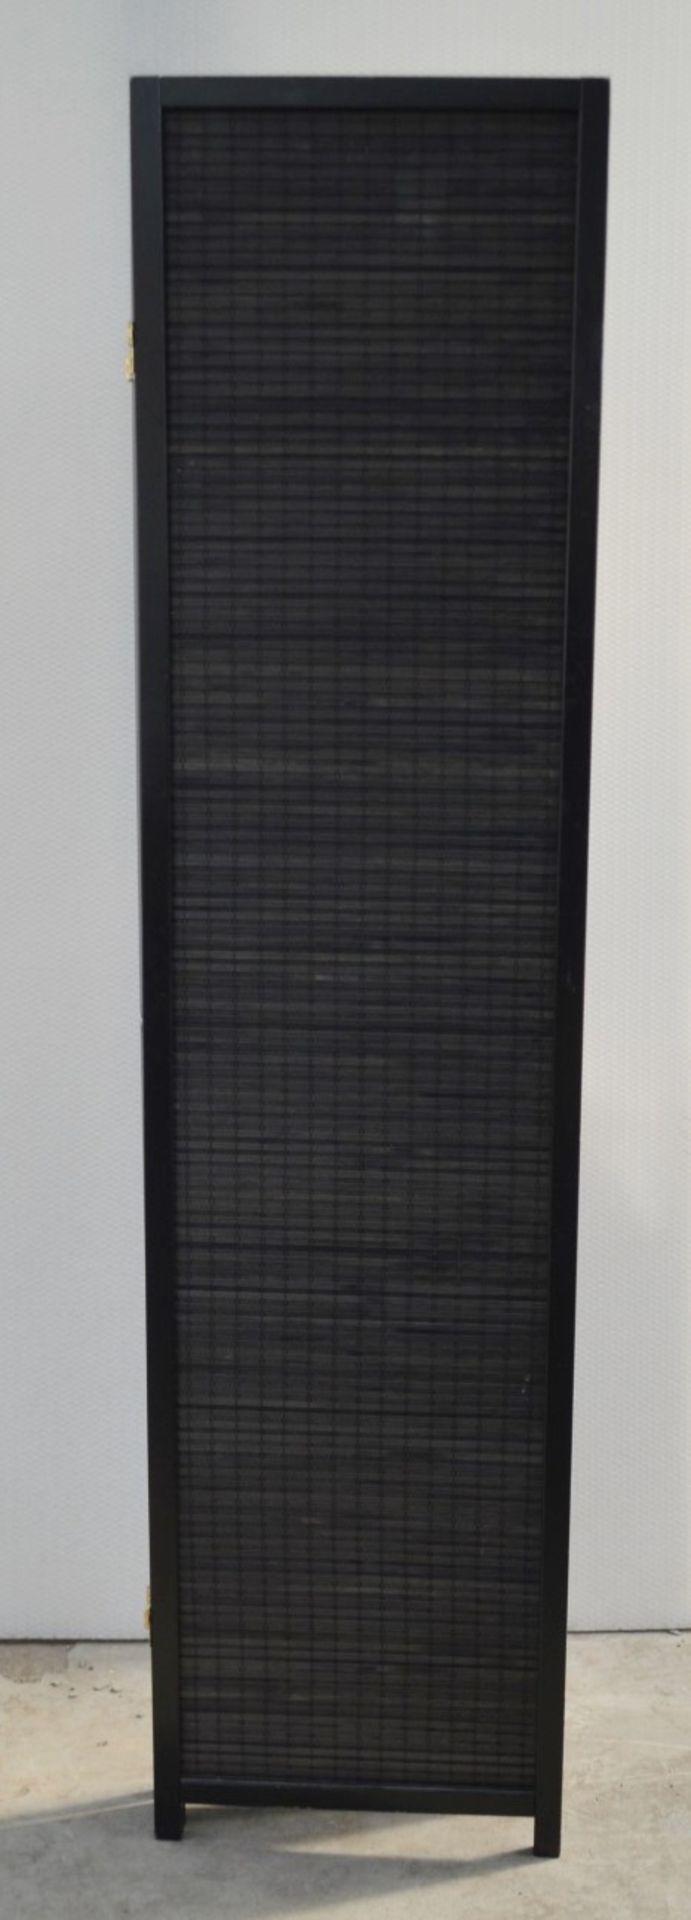 1 x 4-Panel Dressing Screen In Black - Dimensions: Height 180 x Max.Width 180cm - Ref: MHB117 - - Image 3 of 3